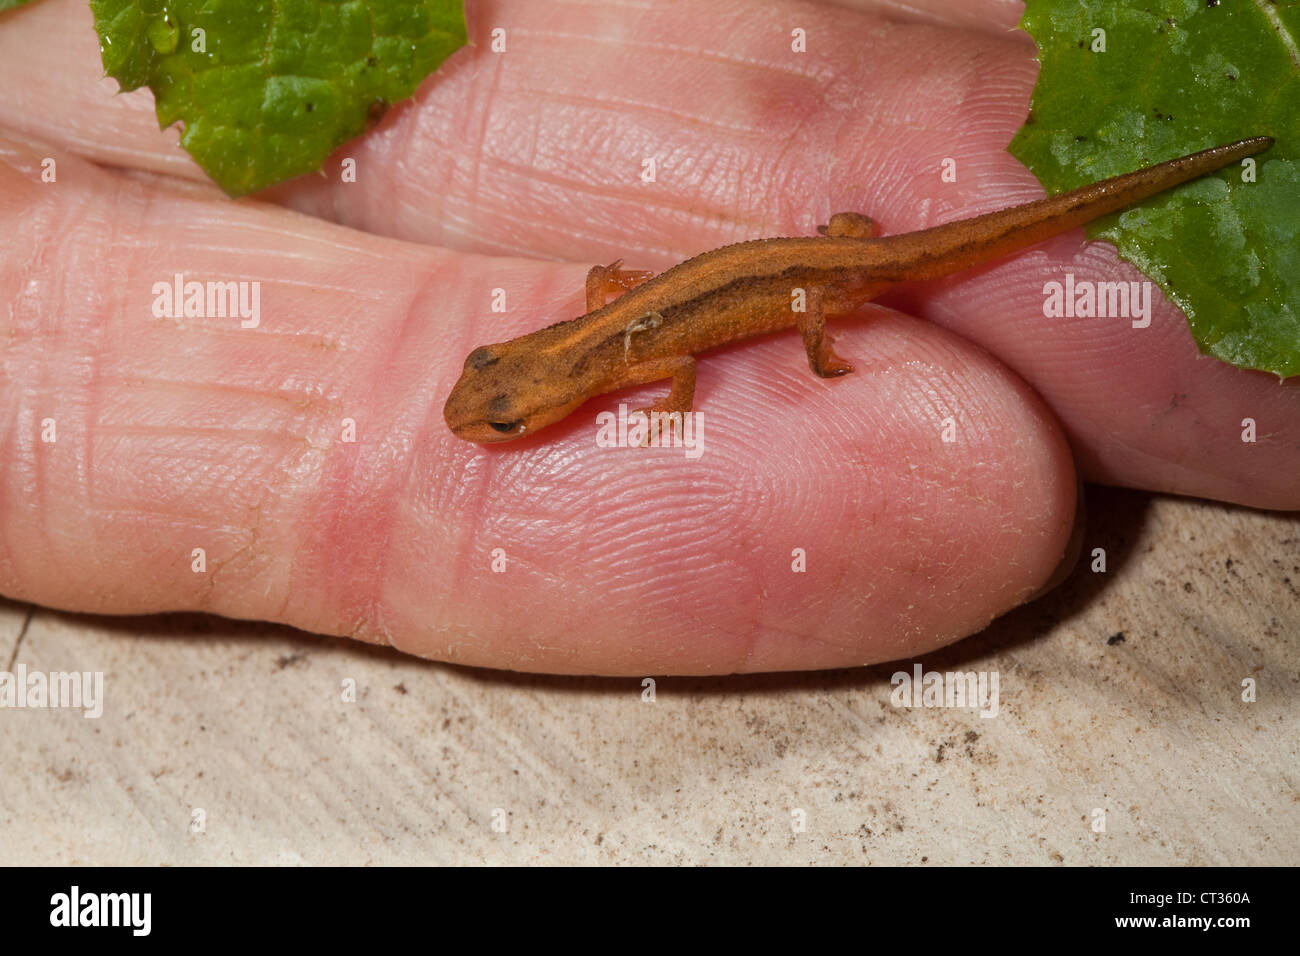 Smooth Newt Lissotriton (Triturus) vulgarise. Metamorphosed newt tadpole from previous year, held on a dampened finger. Found alongside a garden pond. Stock Photo